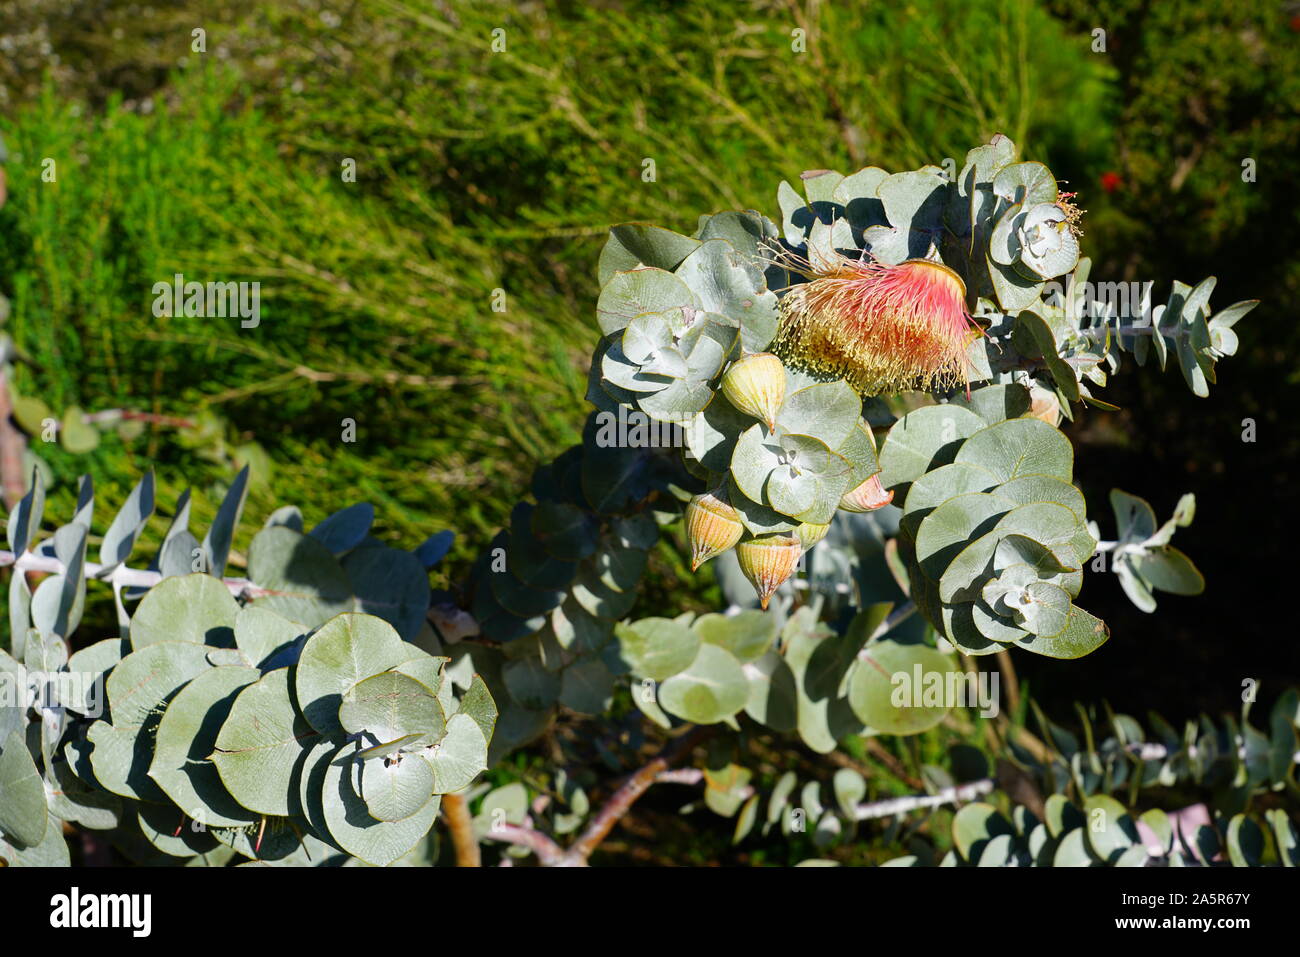 View of a Rose Mallee eucalyptus flower in Australia Stock Photo